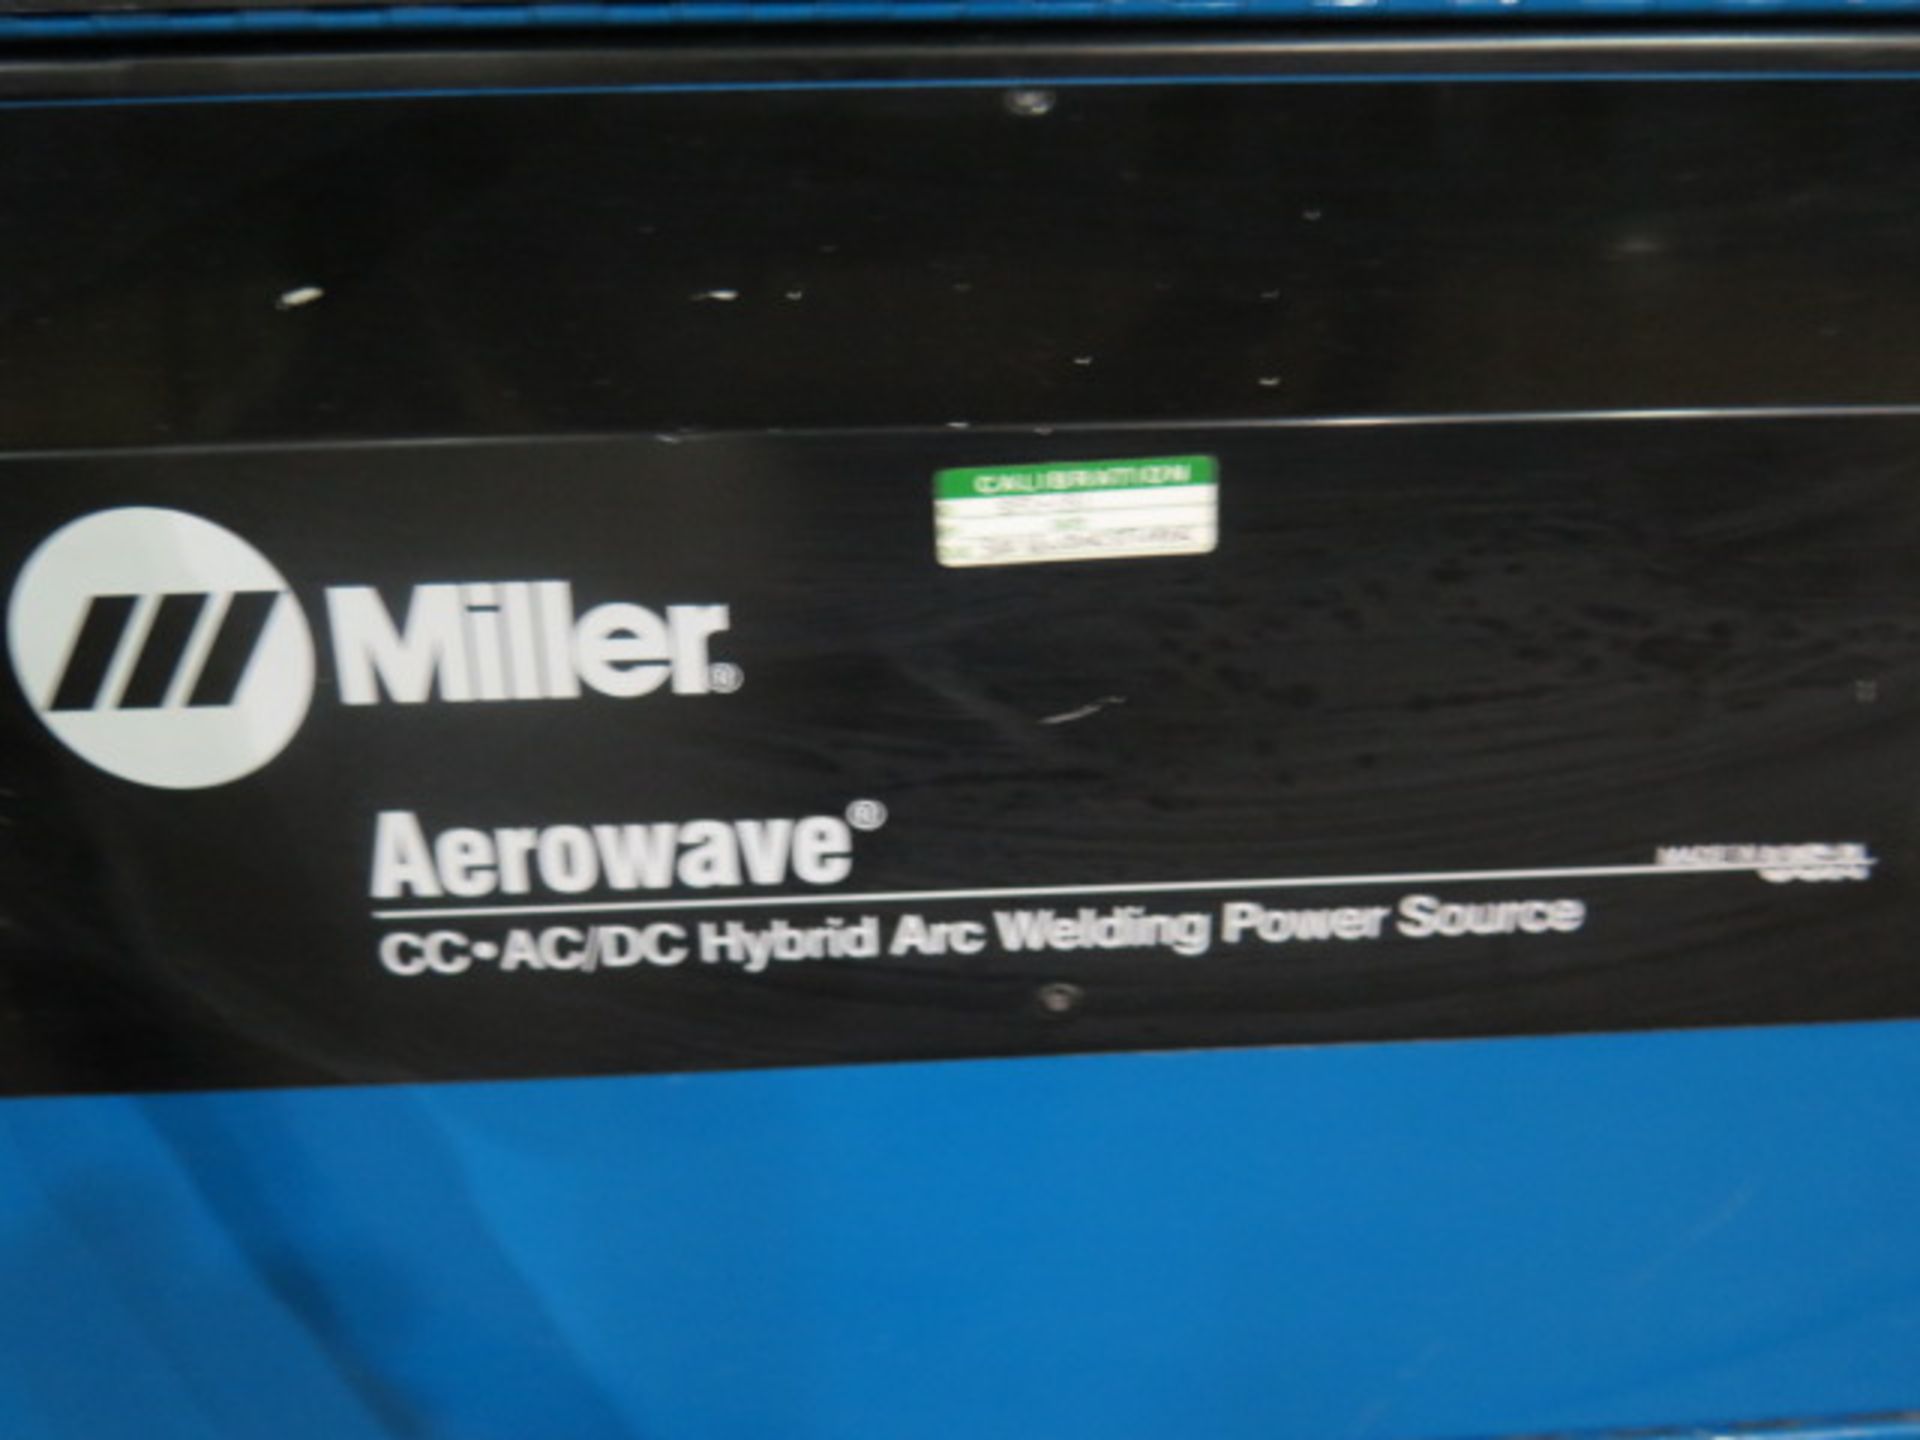 Miller Aerowave 500 Amp CC-AC/DC Arc Welding Source s/n LE079059 w/ Coolmate-3 Cooler, SOLD AS IS - Image 9 of 9